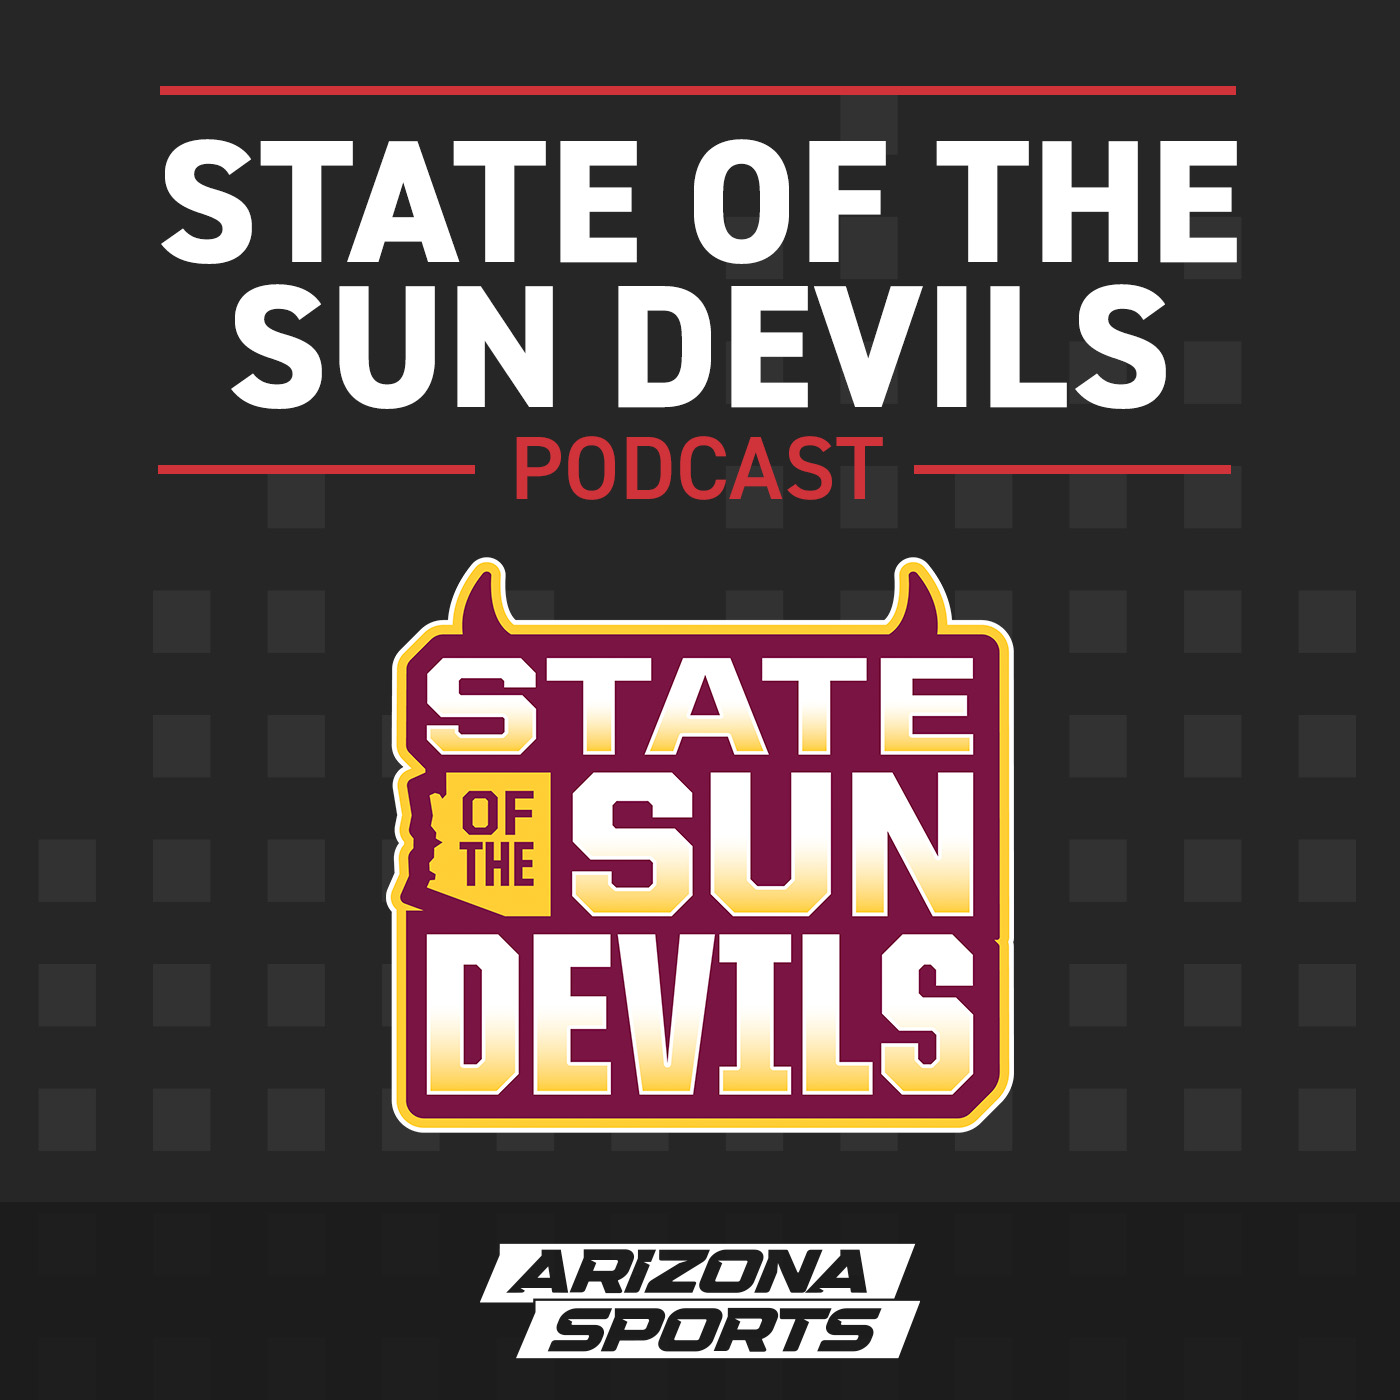 Bobby Hurley joins the show! - Feb. 21